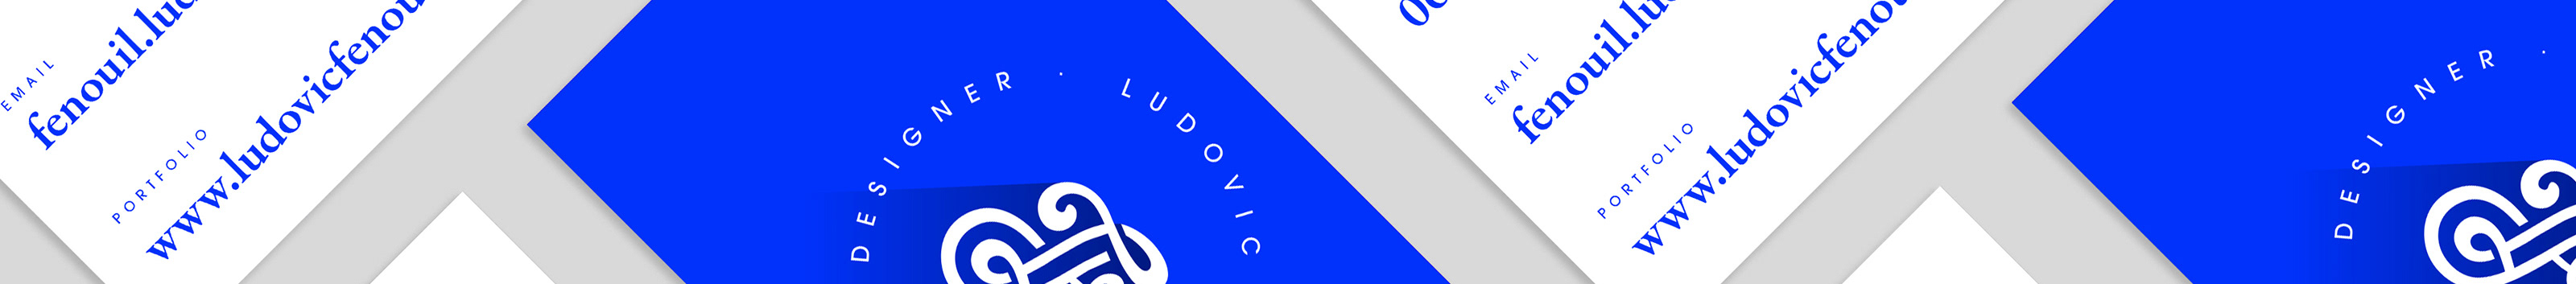 Ludovic Fenouil's profile banner